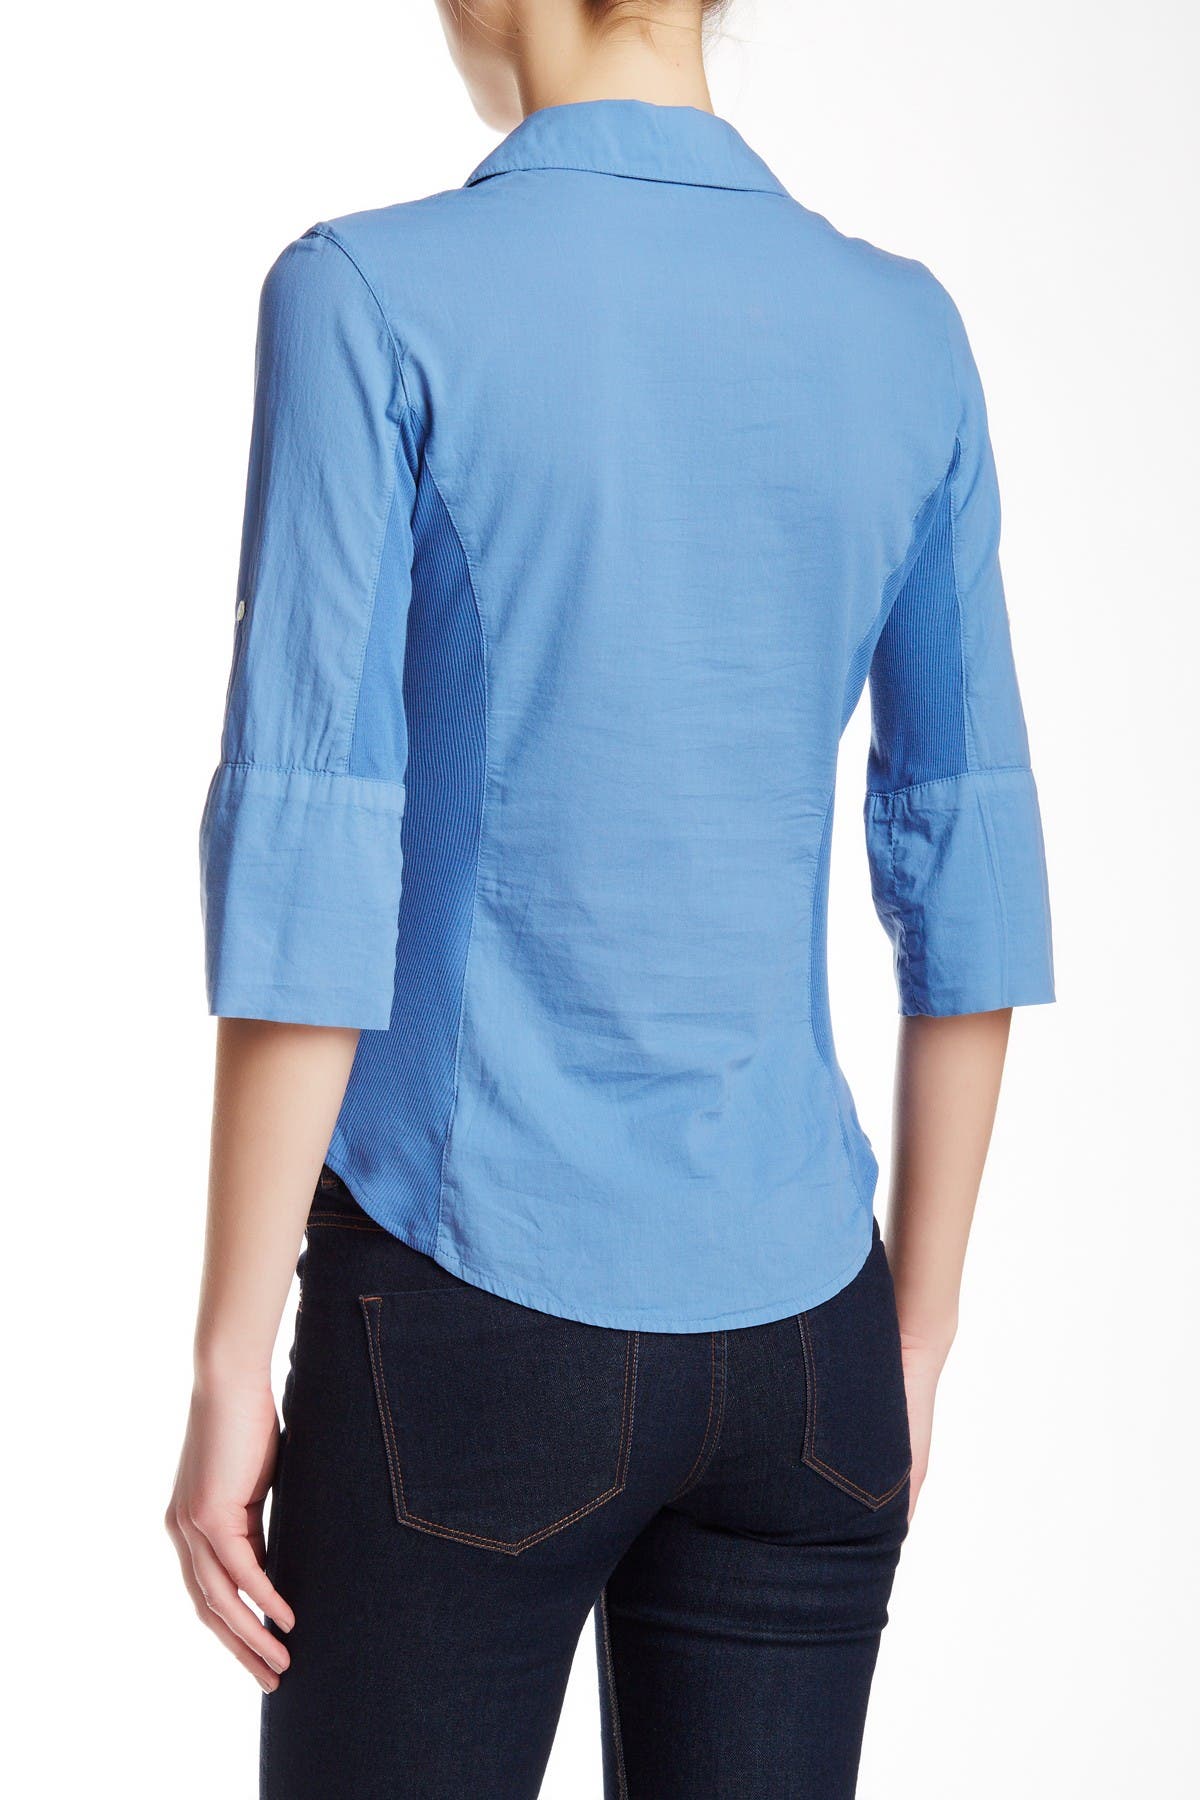 James Perse Contrast Ribbed Surplus Shirt In Hvn